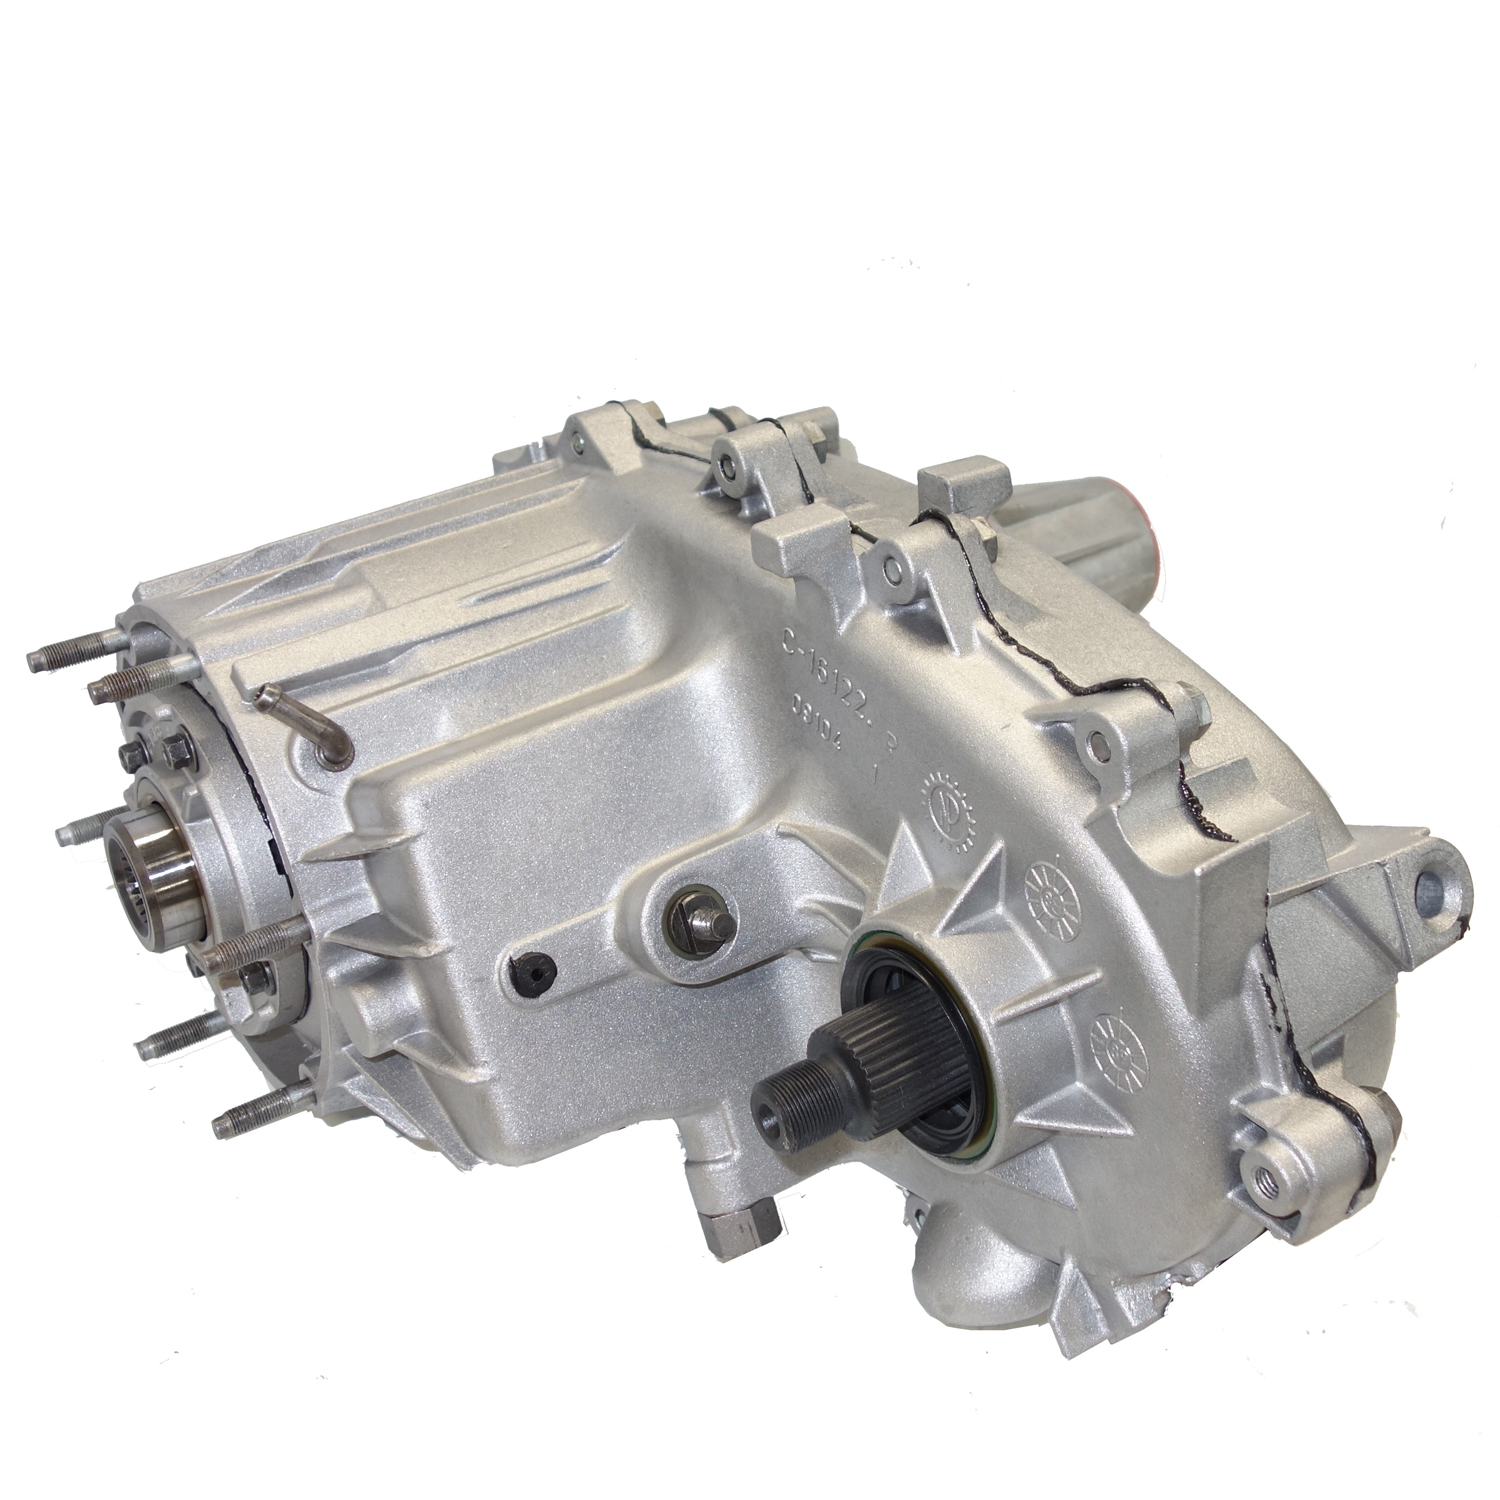 Remanufactured NP242 Transfer Case for Jeep 91-95 Cherokee